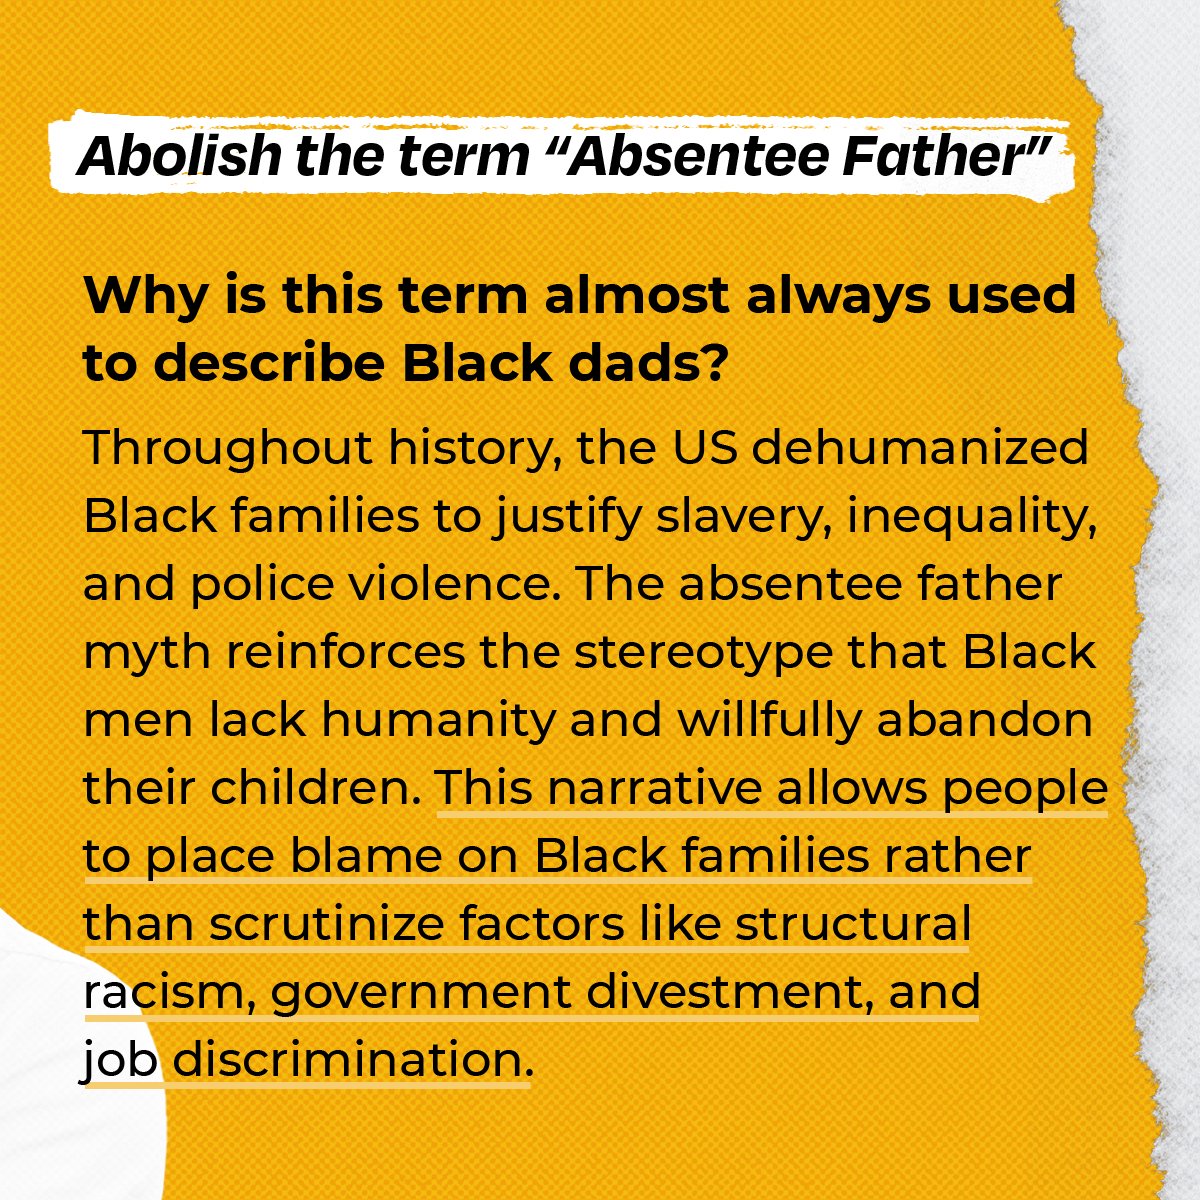 The absentee father myth reinforces the stereotype that Black men lack humanity and responsibility. In reality, of course, many Black fathers never even get the opportunity to be the fathers they are able to be and want to be.  #AbolishRacistTerms  https://colorofchange.org/narrativepower/ 